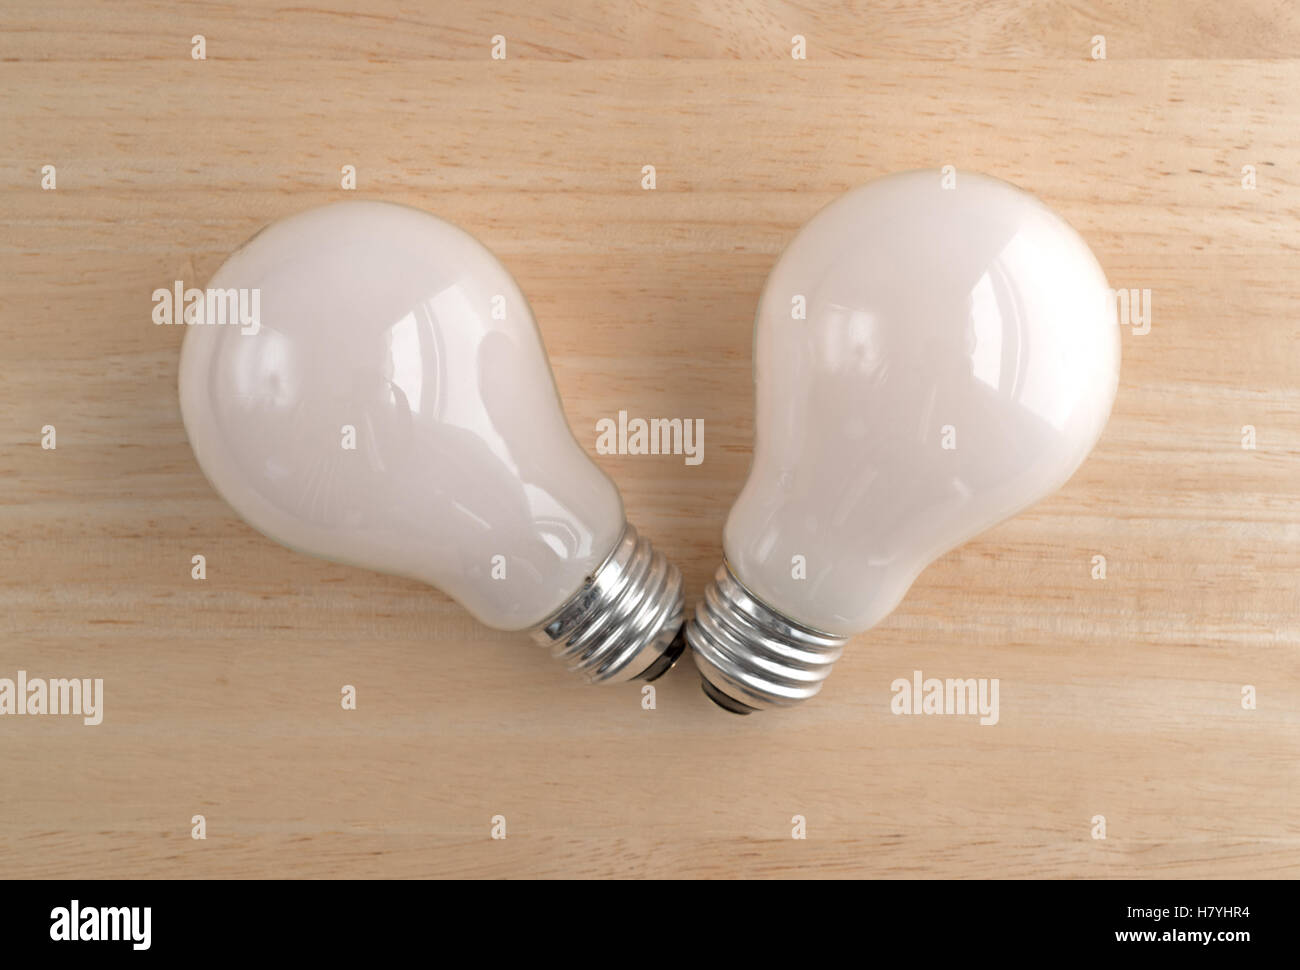 Top view of two soft white energy saving light bulbs on a wood table. Stock Photo